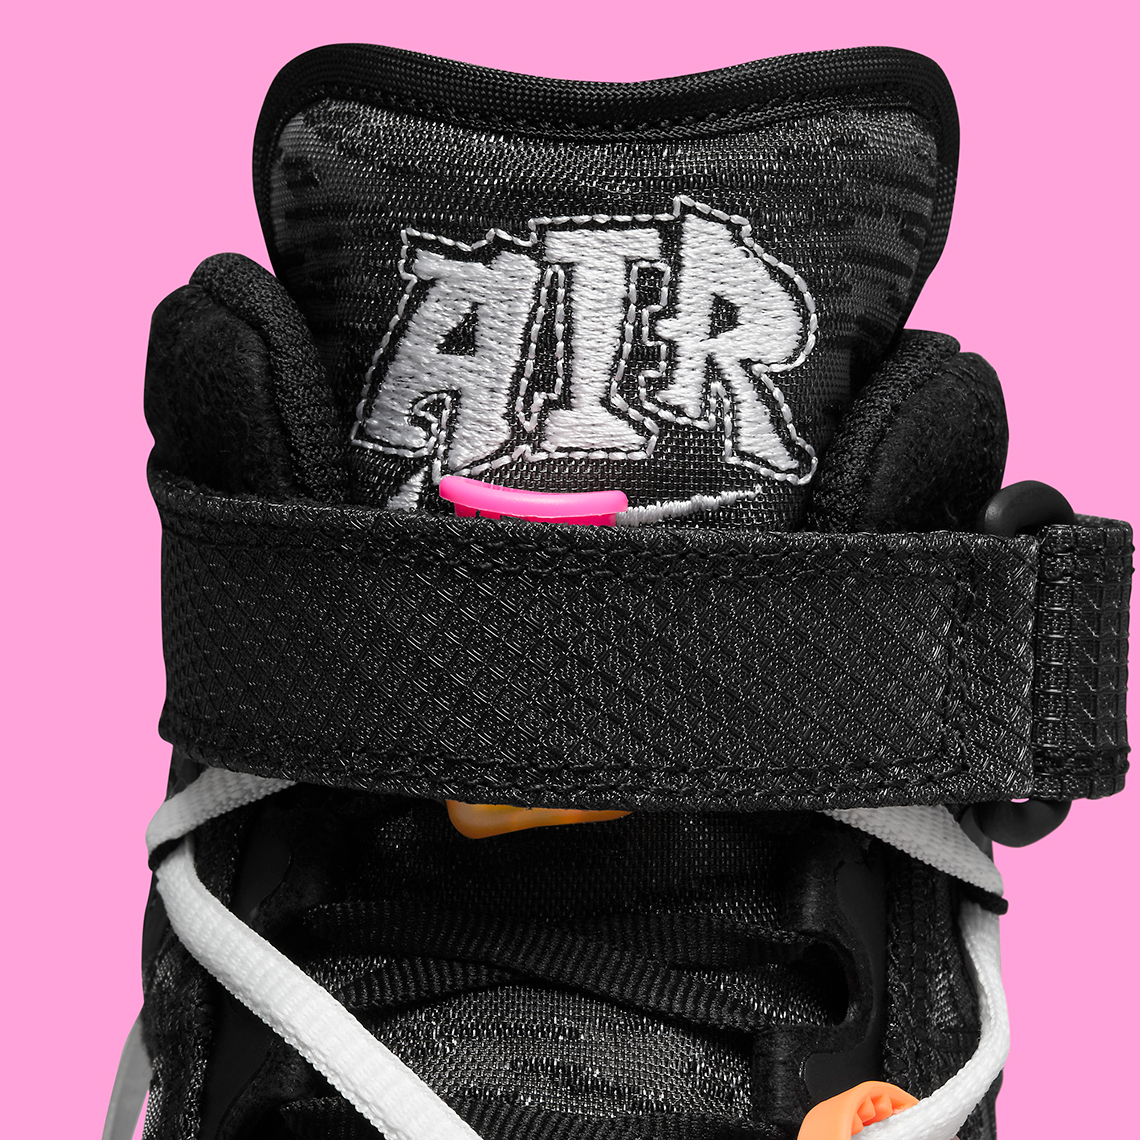 Off-White™ x Nike Air Force 1 Mid in black